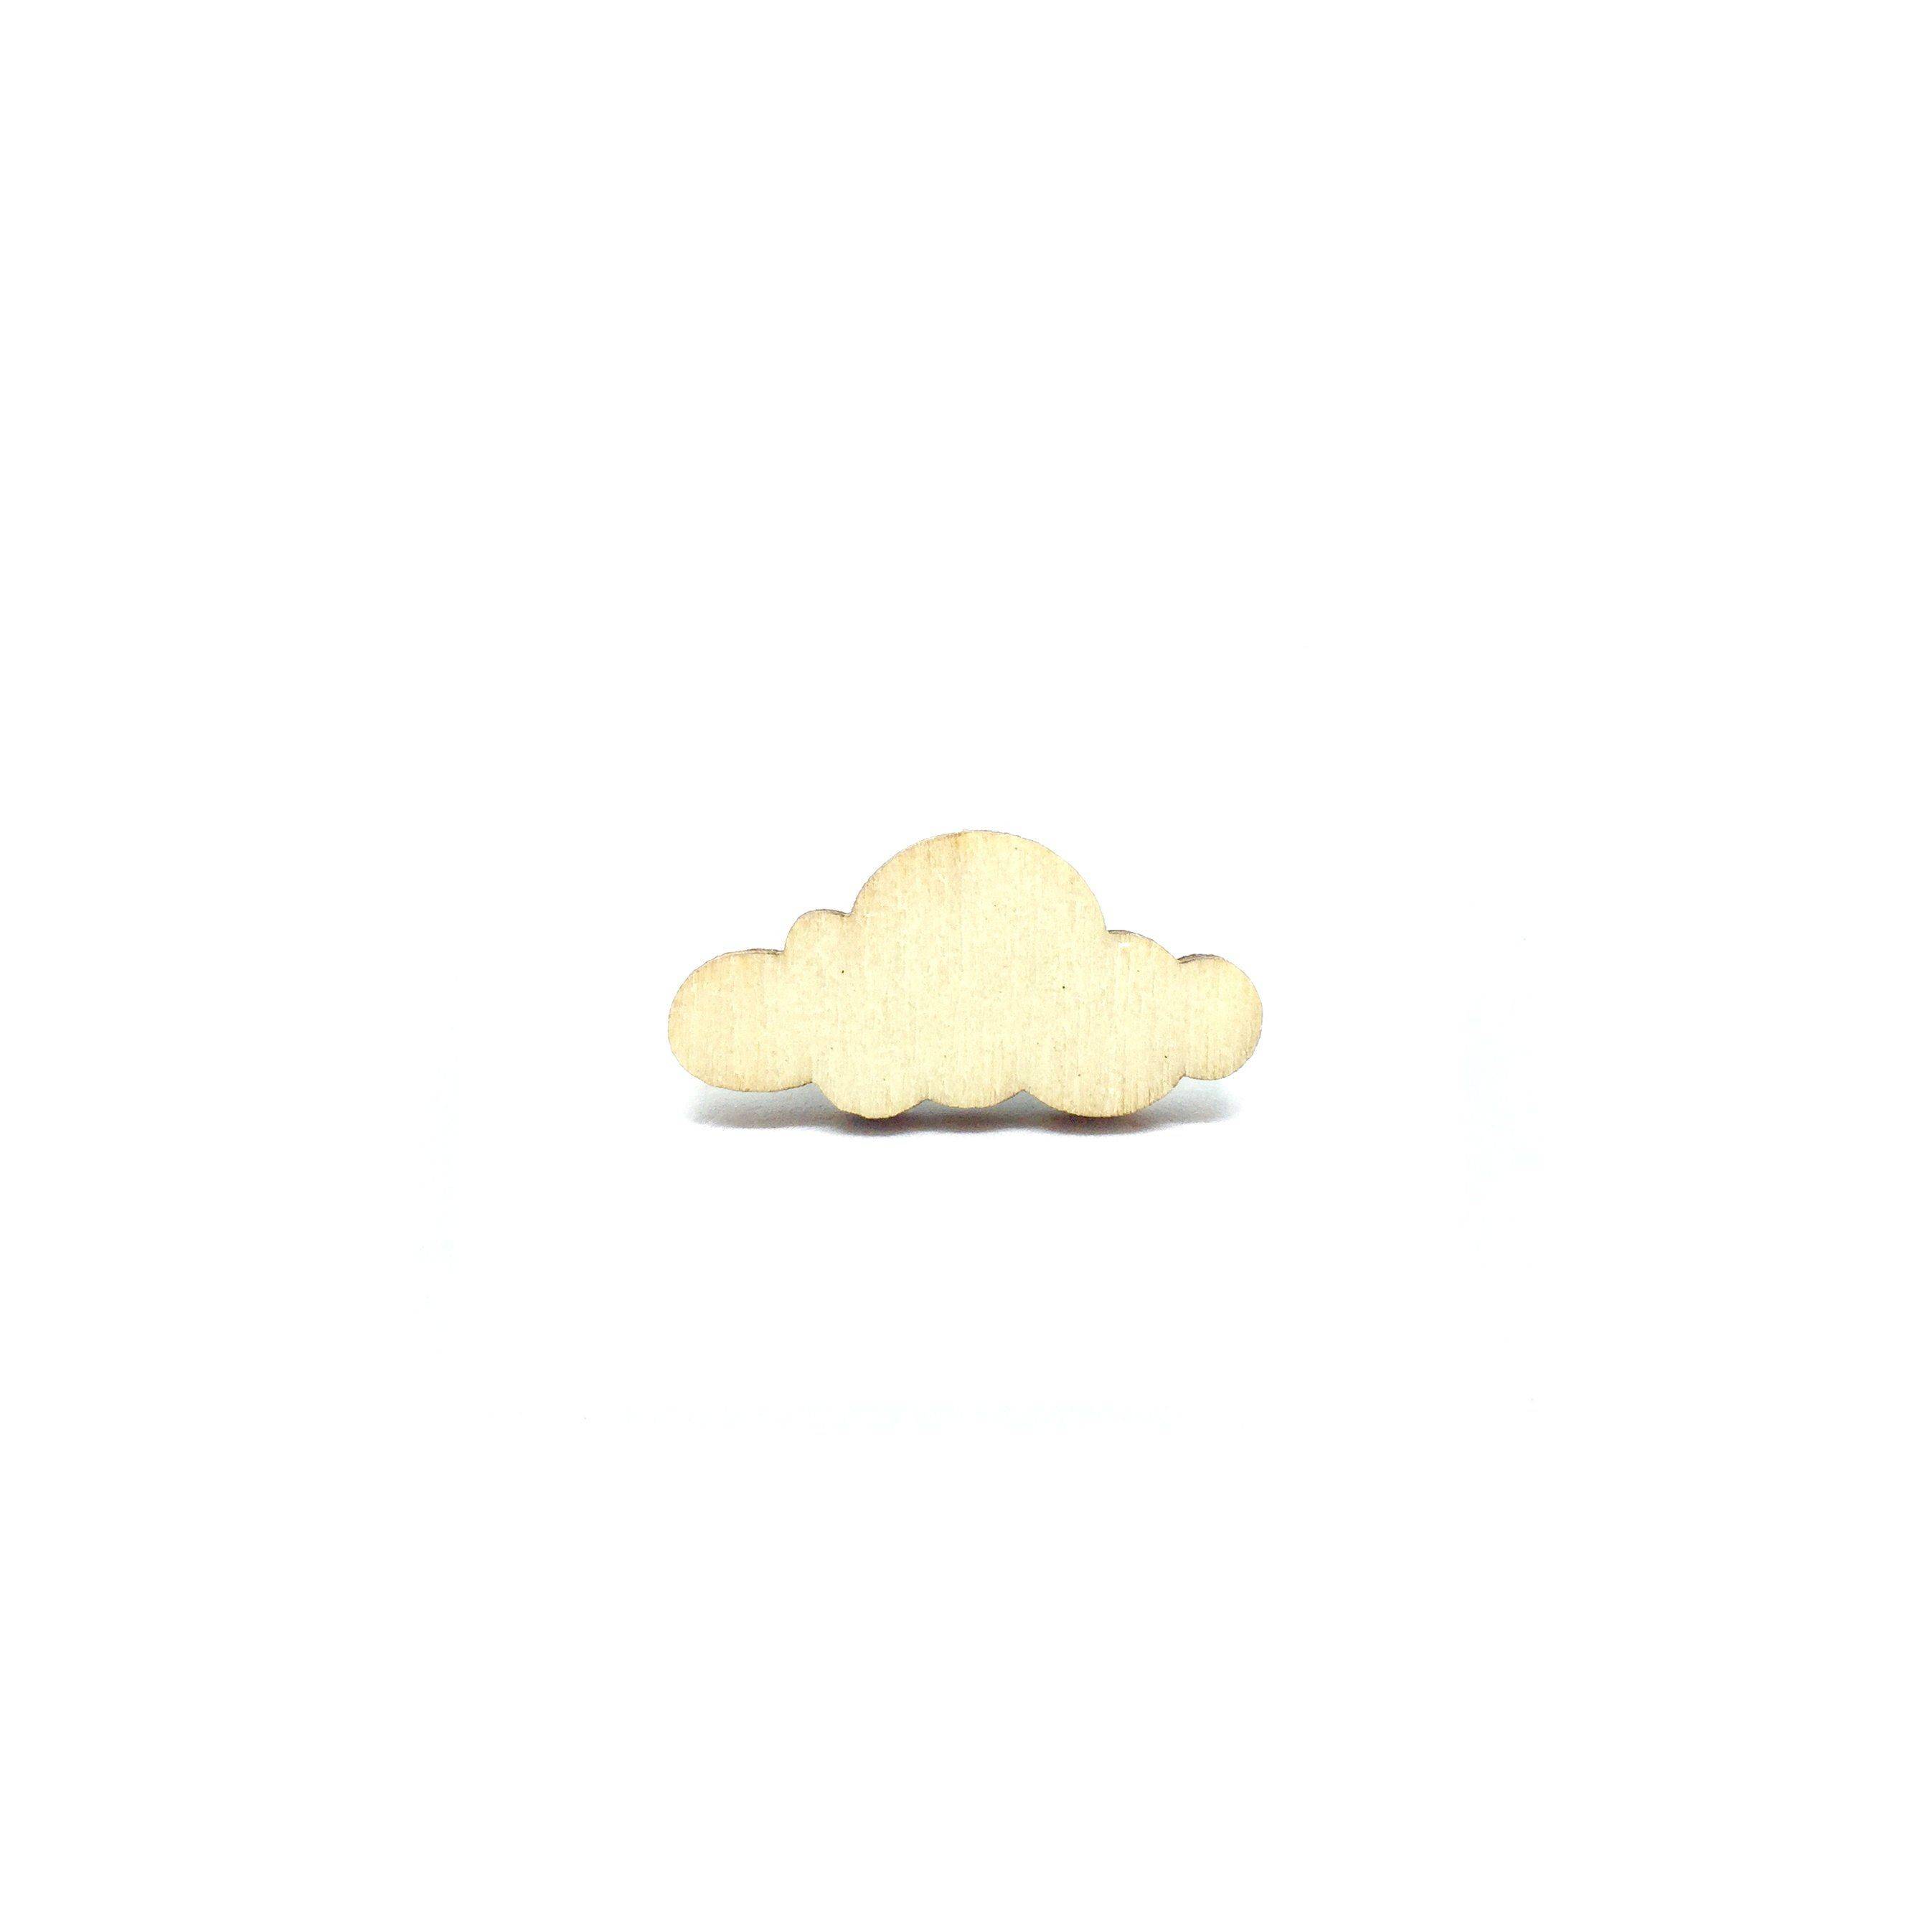 Sunny Clouds Wooden Brooch Pin - Brooches - Paperdaise Accessories - Naiise